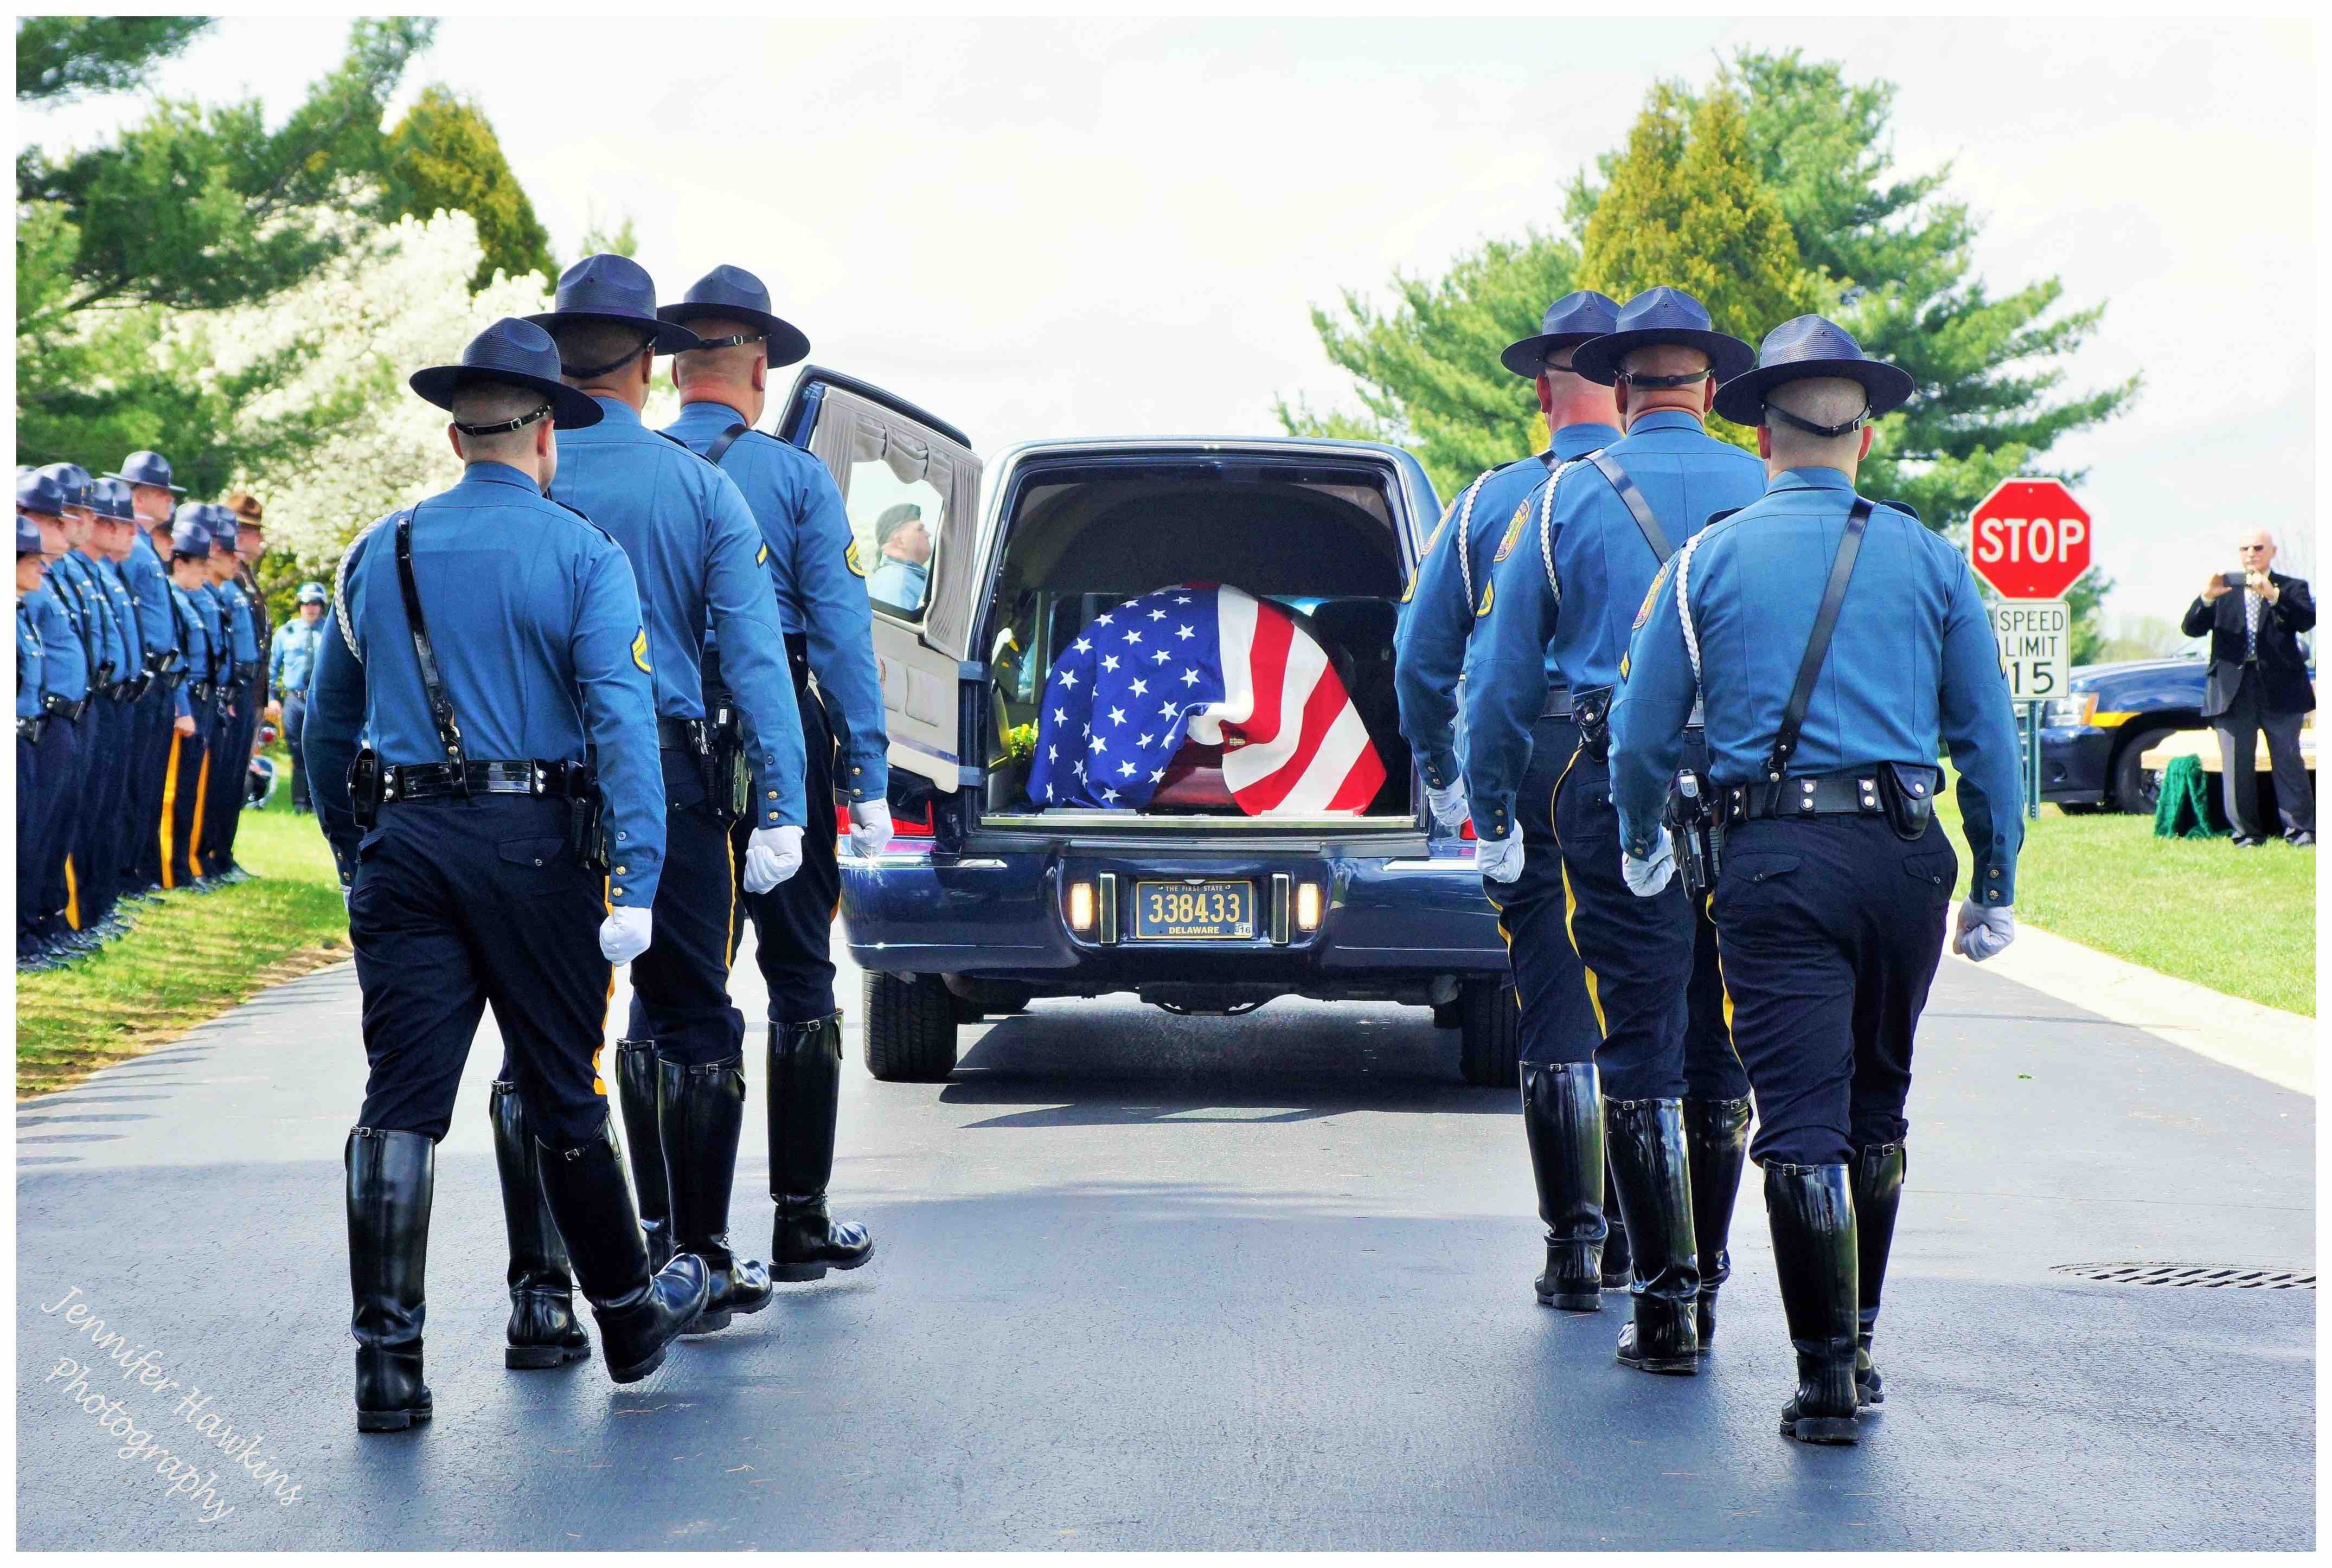 Delaware State Police - We Honor Those Killed In The Line of Duty